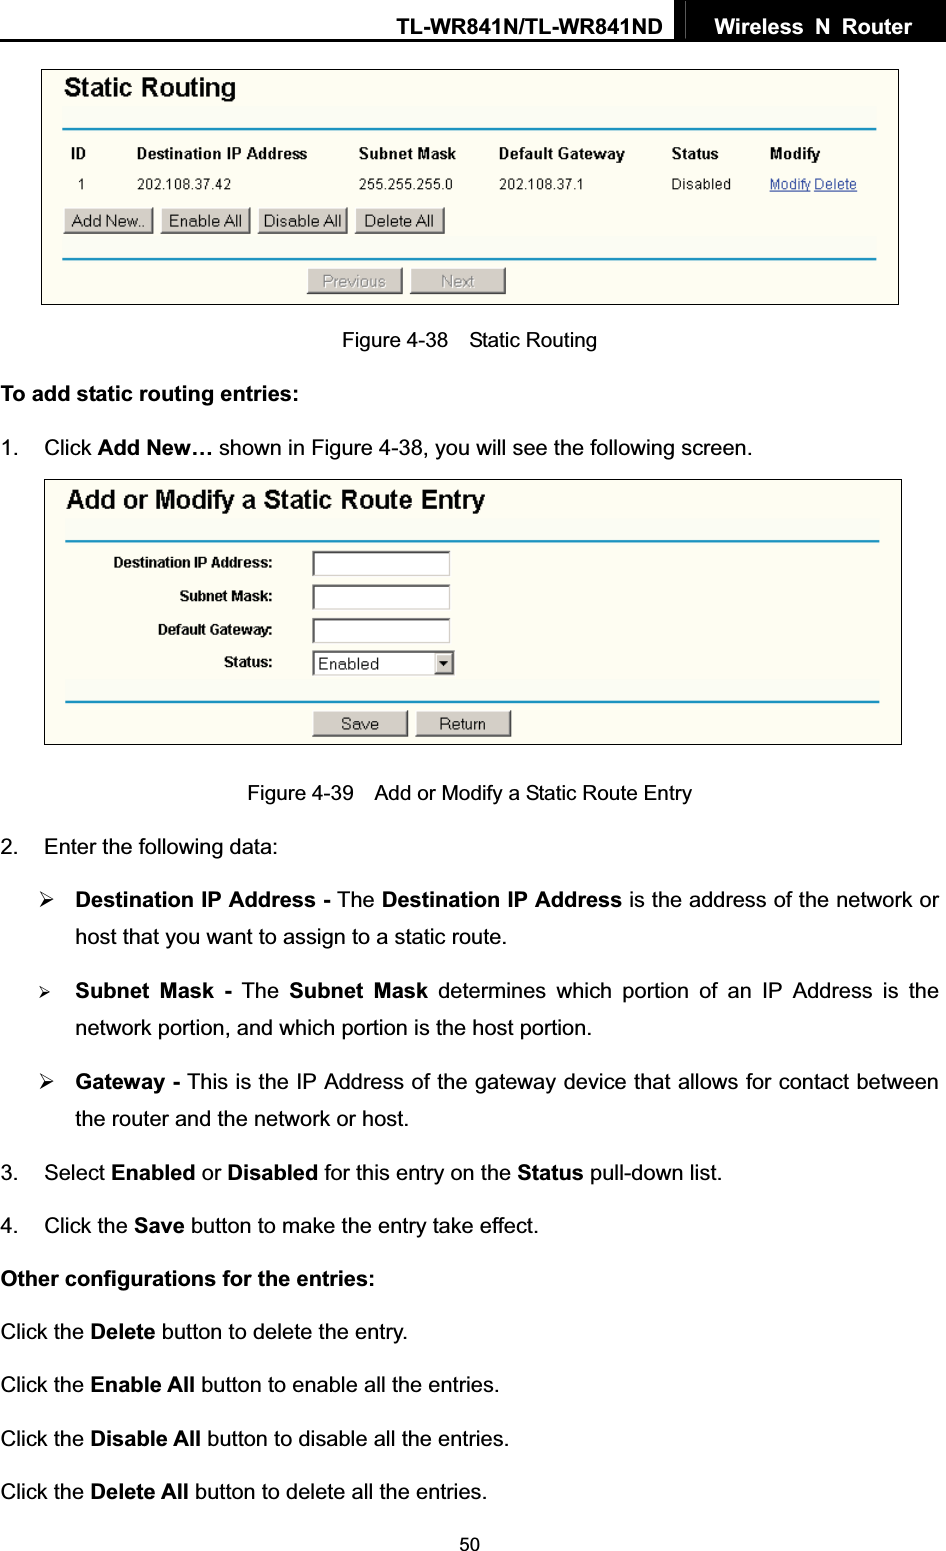 TL-WR841N/TL-WR841ND  Wireless N Router  50Figure 4-38  Static Routing To add static routing entries: 1. Click Add New… shown in Figure 4-38, you will see the following screen. Figure 4-39    Add or Modify a Static Route Entry 2.  Enter the following data: ¾Destination IP Address - The Destination IP Address is the address of the network or host that you want to assign to a static route. ¾Subnet Mask - The Subnet Mask determines which portion of an IP Address is the network portion, and which portion is the host portion. ¾Gateway - This is the IP Address of the gateway device that allows for contact between the router and the network or host. 3. Select Enabled or Disabled for this entry on the Status pull-down list. 4. Click the Save button to make the entry take effect. Other configurations for the entries: Click the Delete button to delete the entry. Click the Enable All button to enable all the entries. Click the Disable All button to disable all the entries. Click the Delete All button to delete all the entries. 